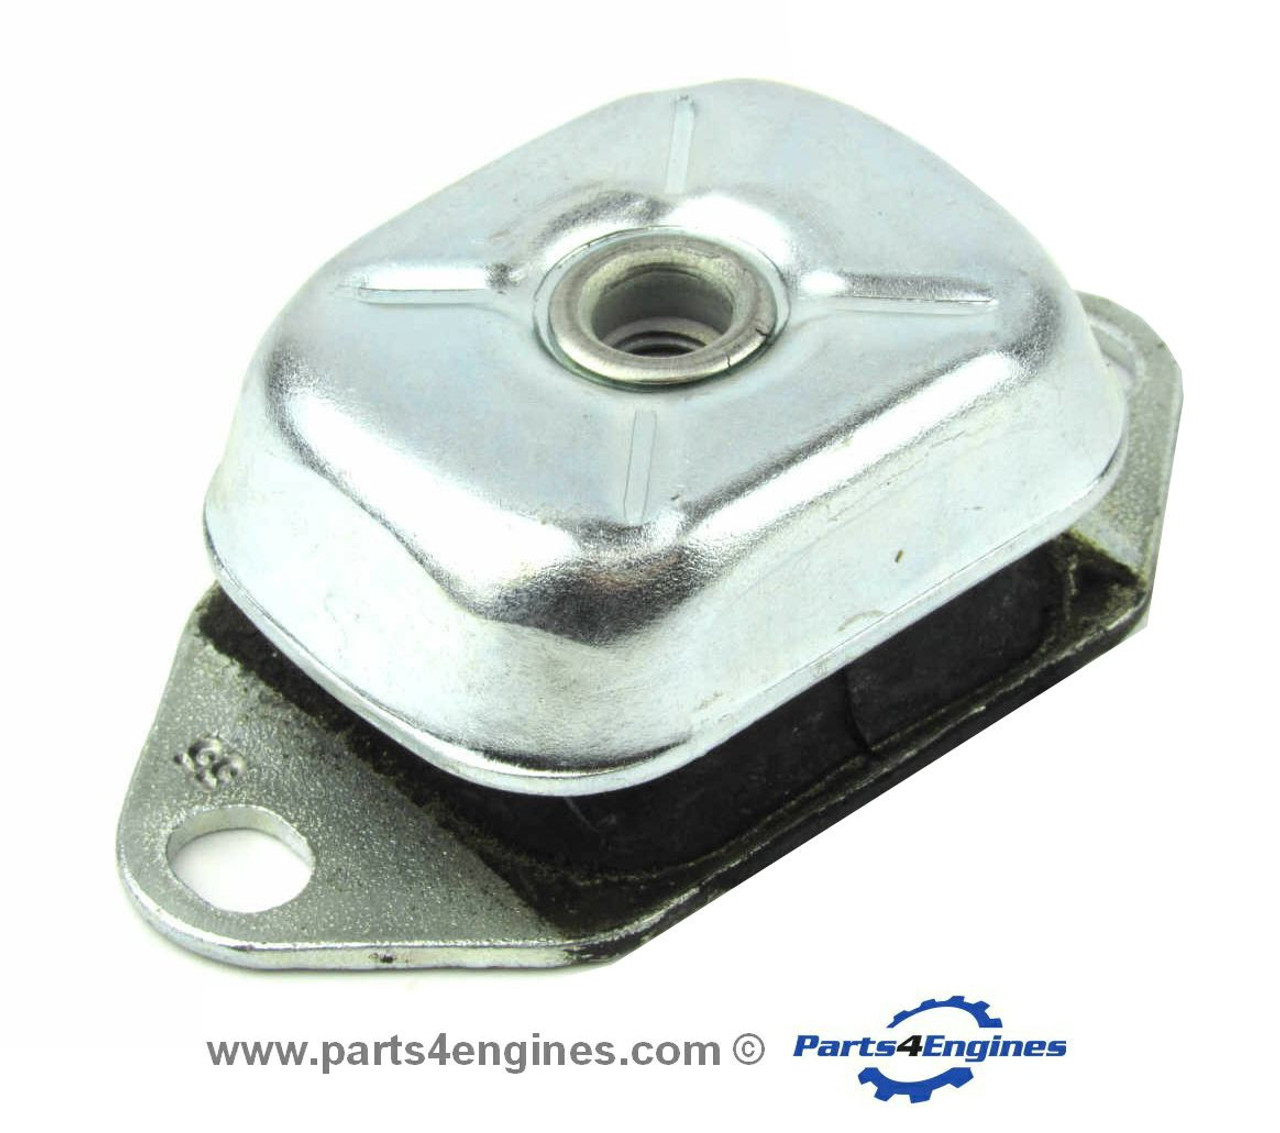 Perkins 4.99 marine engine mounting from parts4engines.com